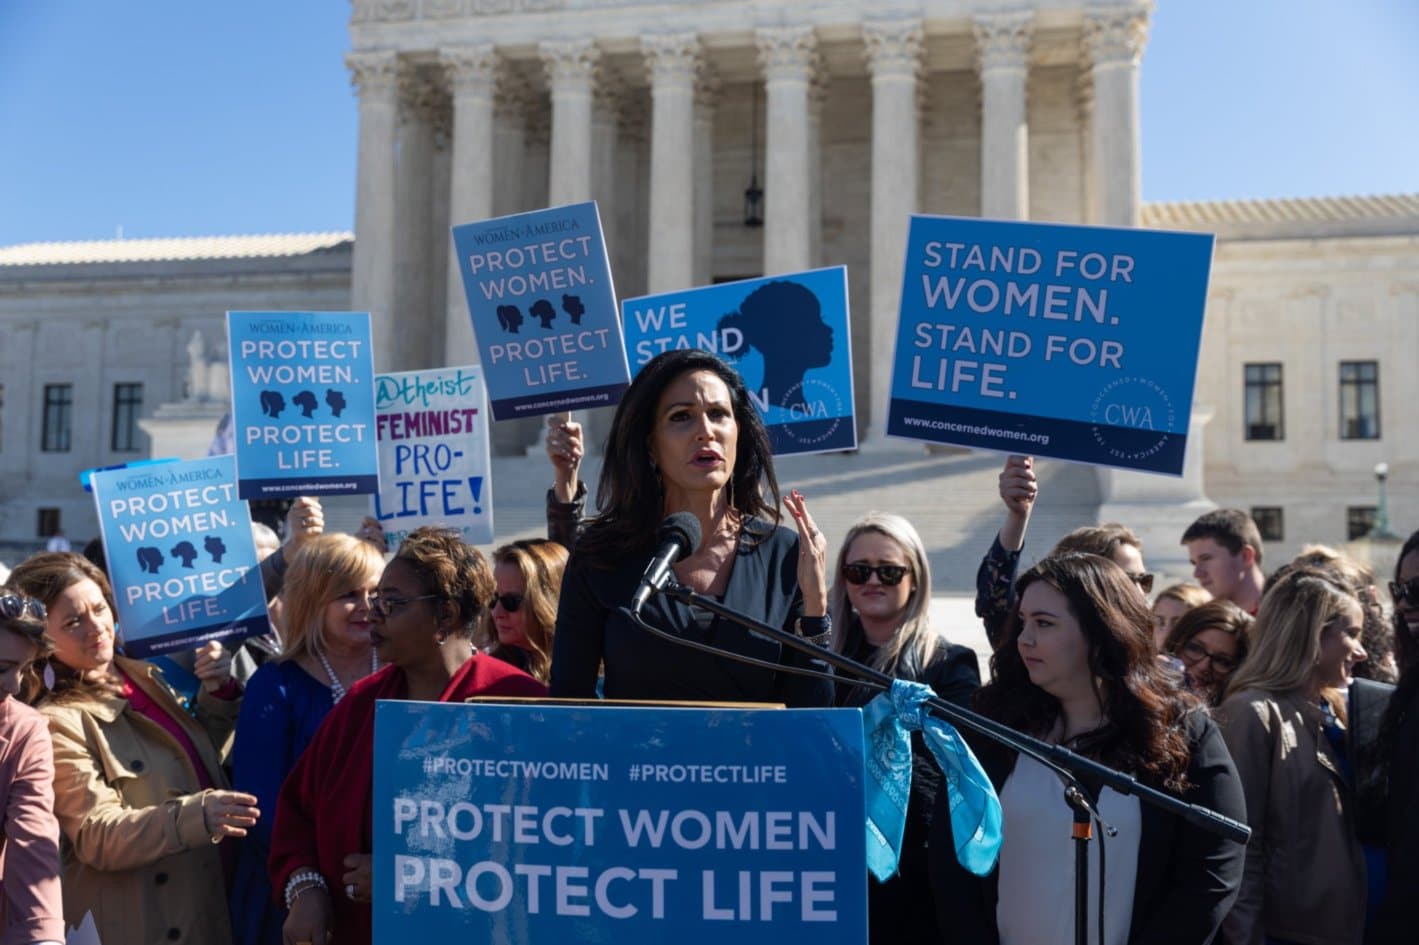 CWA CEO and President Penny Nance speaking at Protect Women Protect Life rally at the Supreme Court